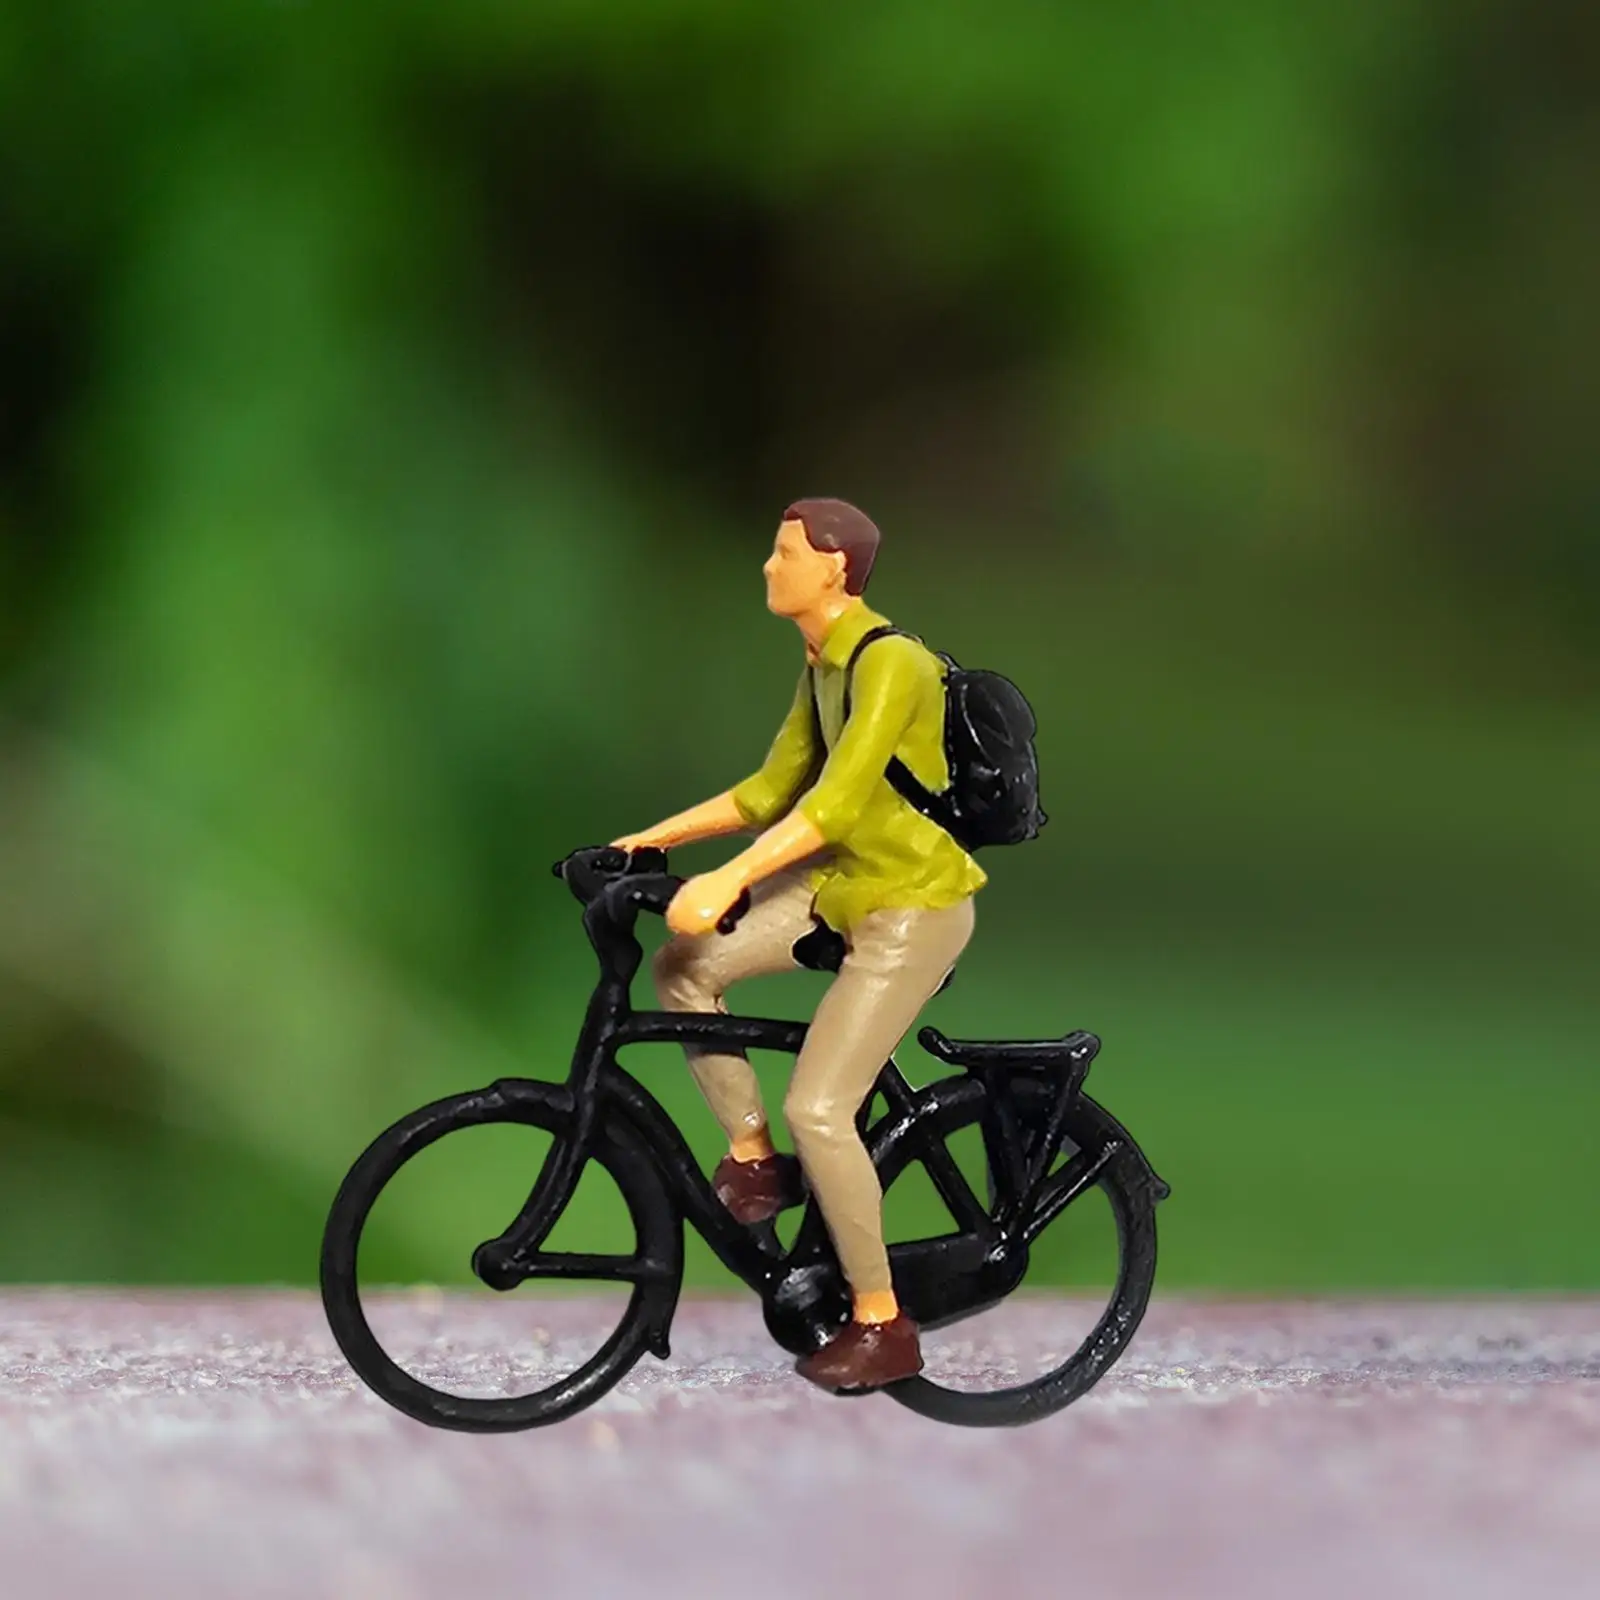 1/87 Scale Cyclist Figurine Miniature People Model for Sand Table Layout Decoration